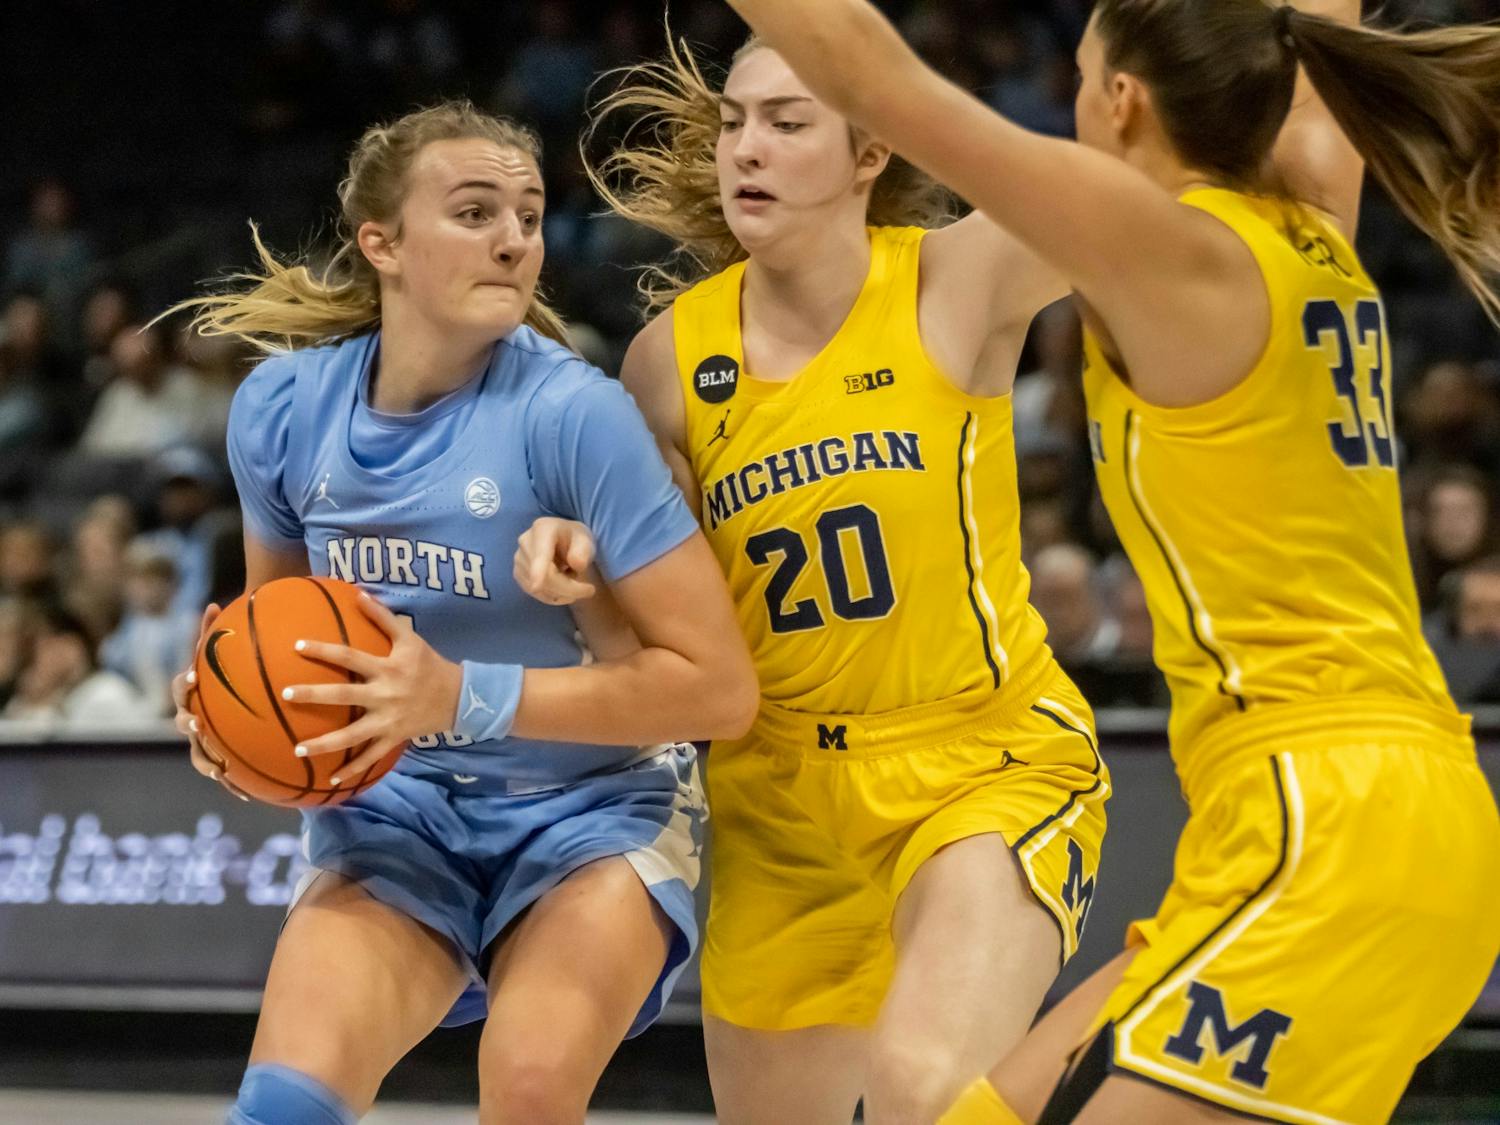 UNC junior guard Alyssa Utsby (1) looks for an during a game against Michigan at the Spectrum Center in Charlotte, N.C., on Tuesday Dec. 20, 2022. UNC fell to Michigan 76-68.